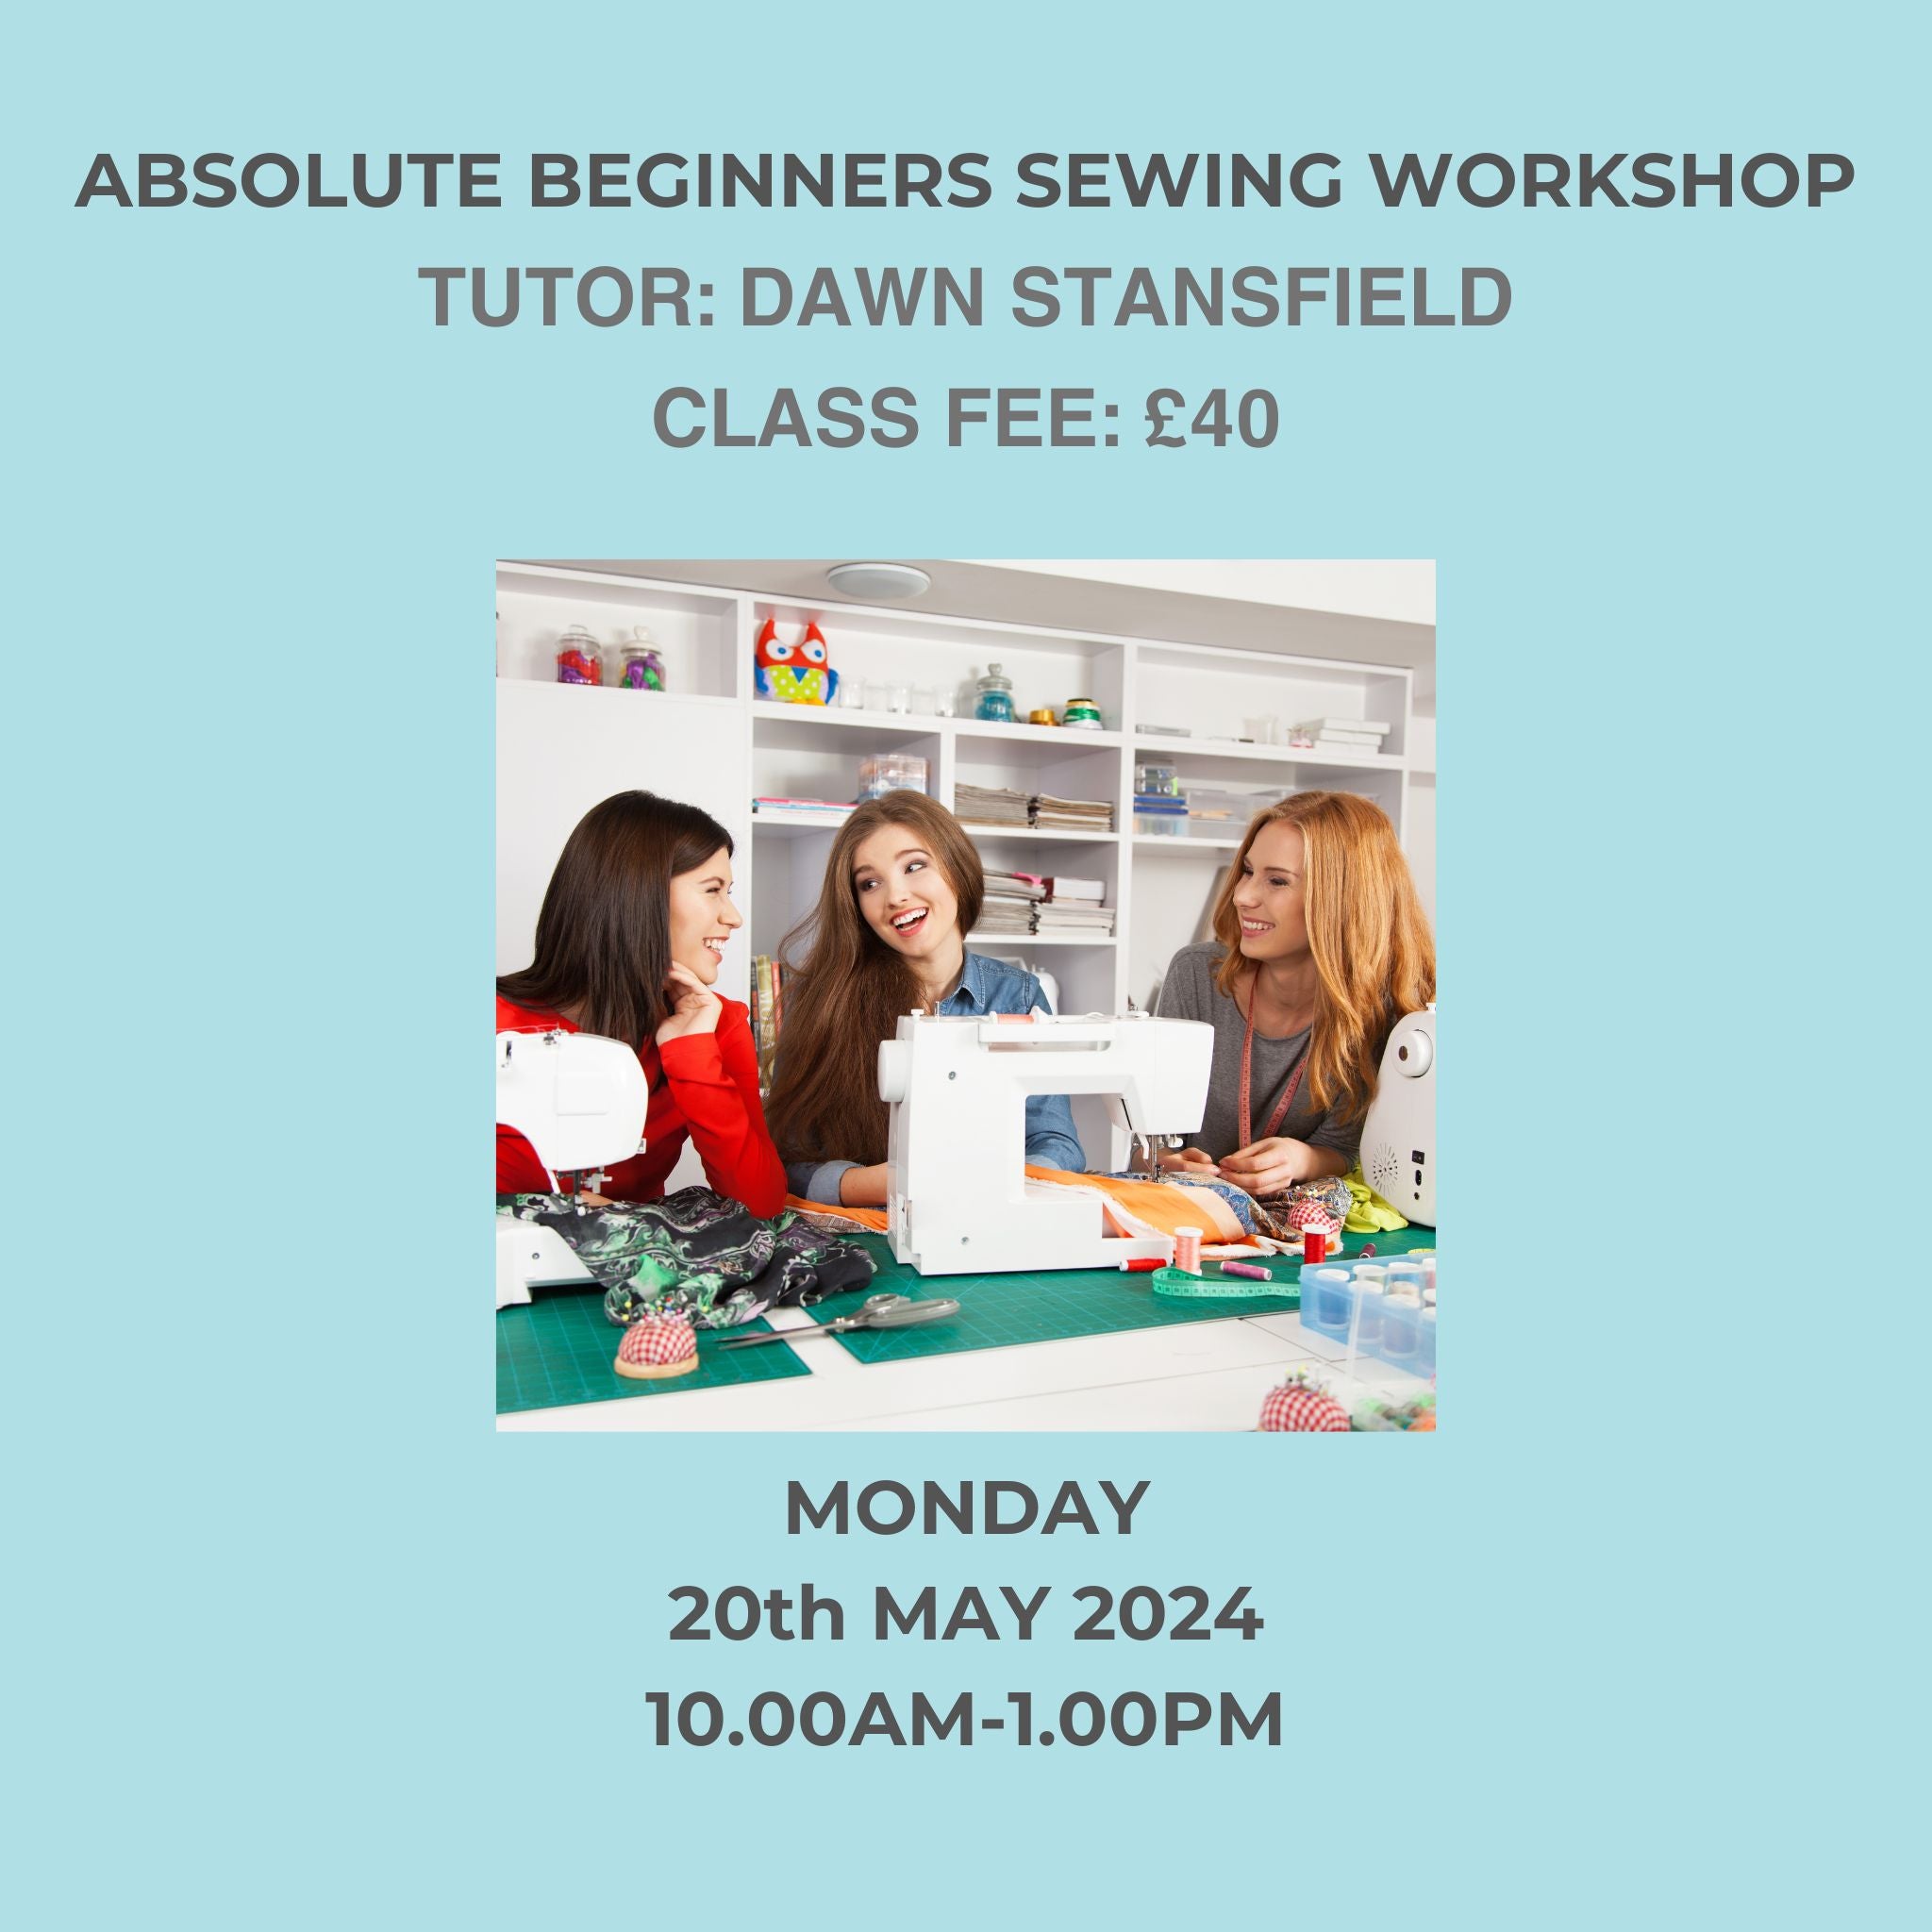 Absolute Beginners Sewing Workshop - Monday 20th May 2024